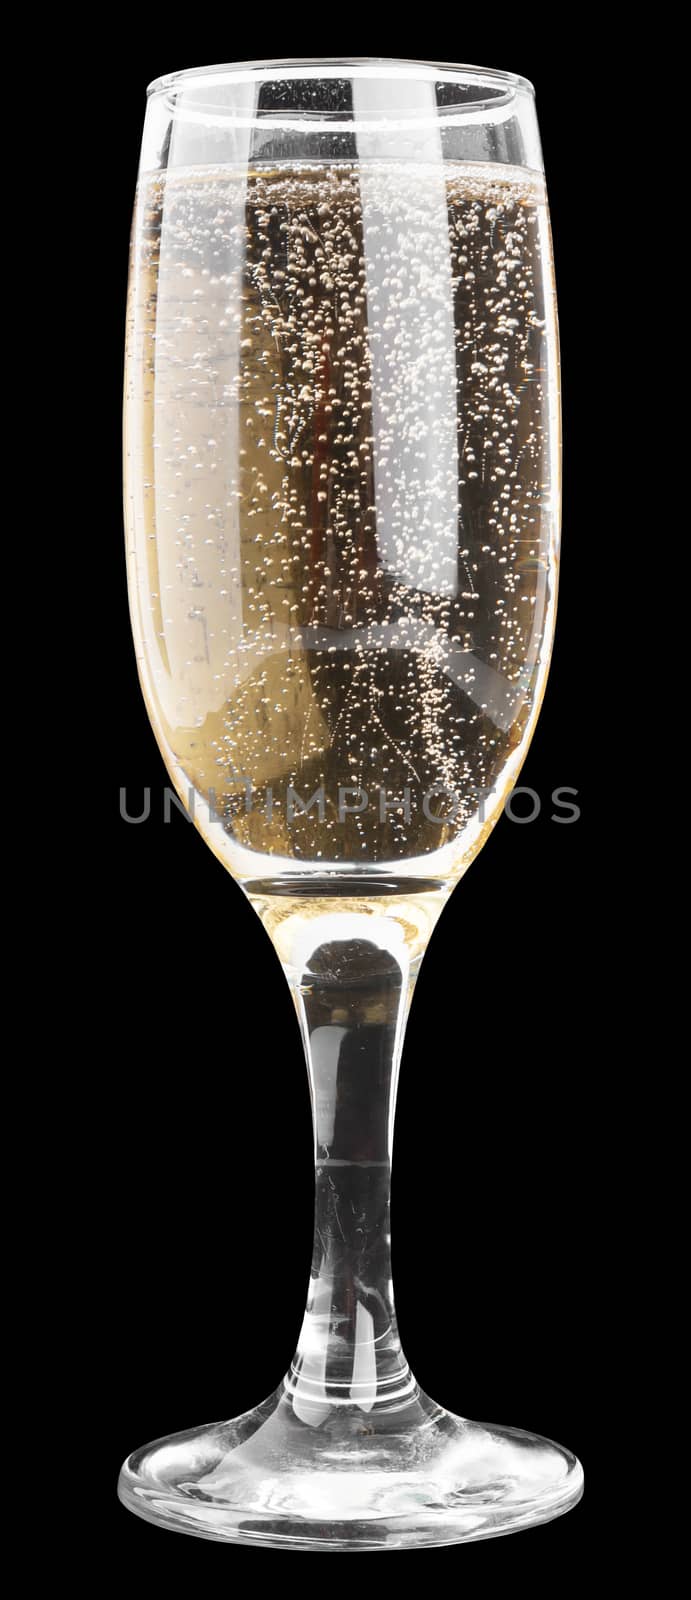 Champagne glass on black background, close up view